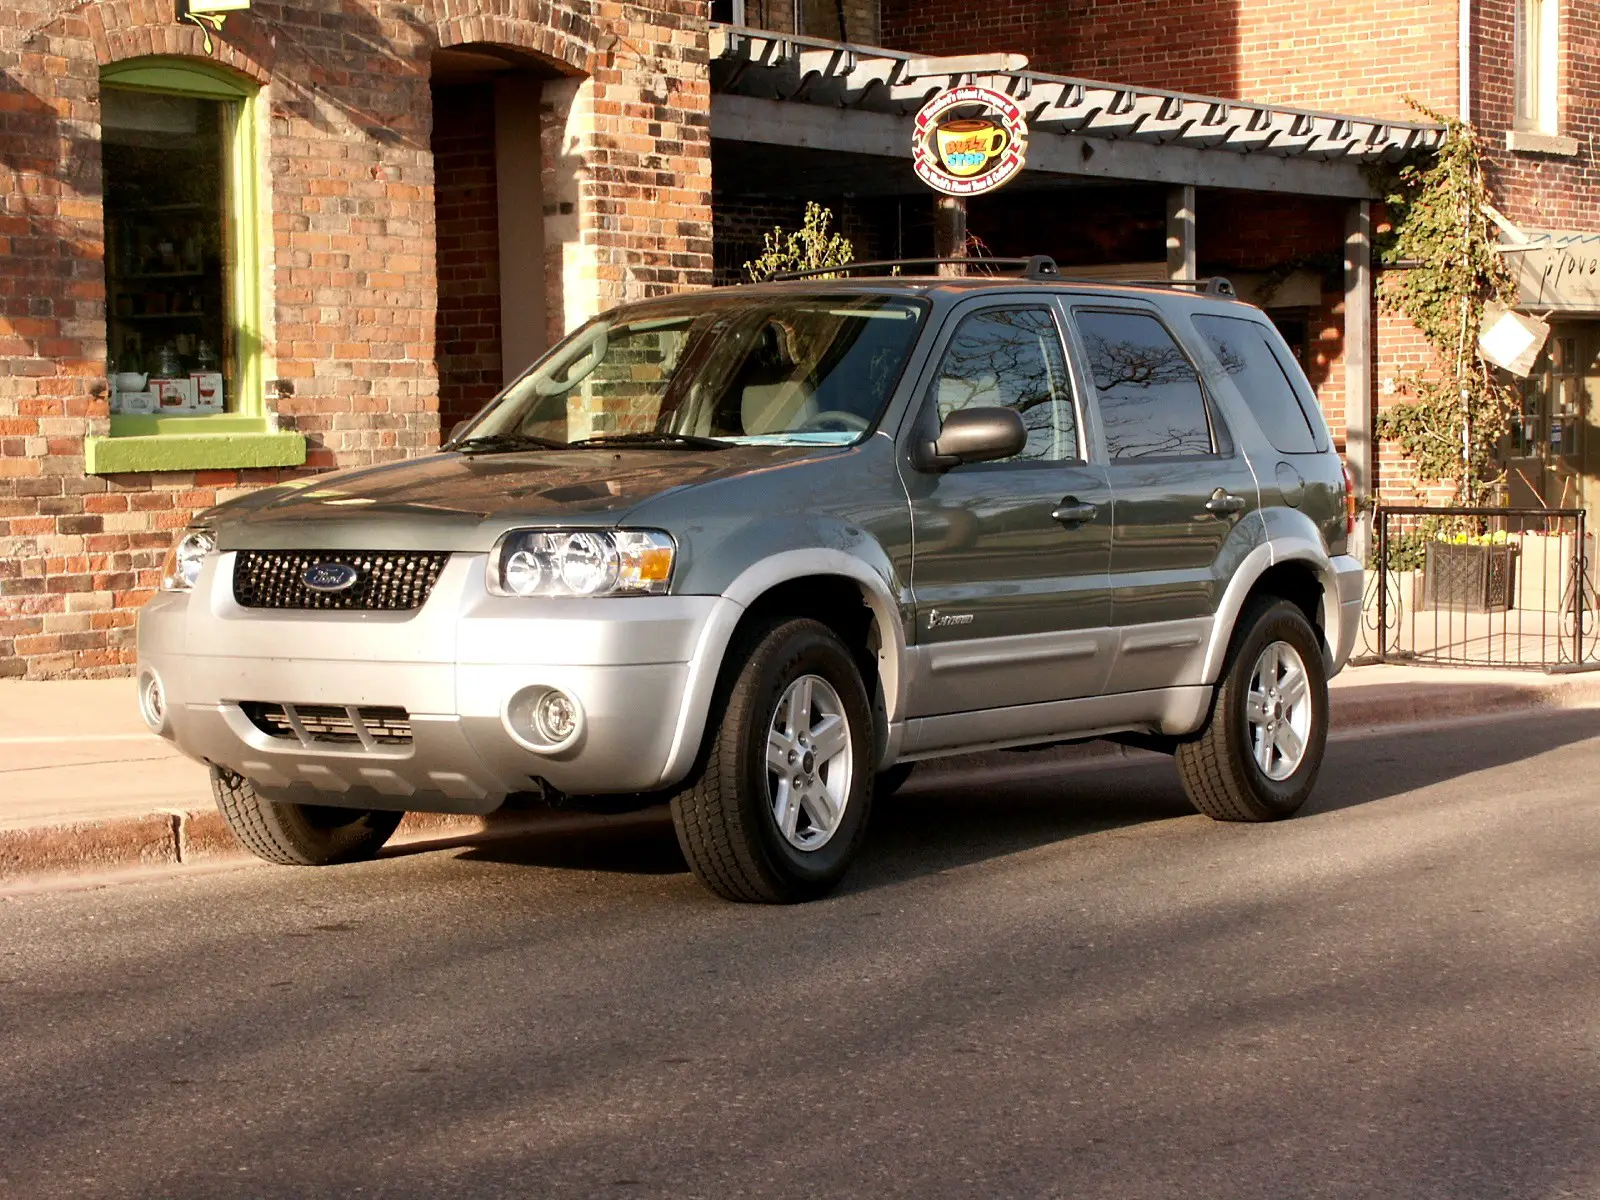 Ford Escape Review on 2005 Ford Escape Hybrid Review